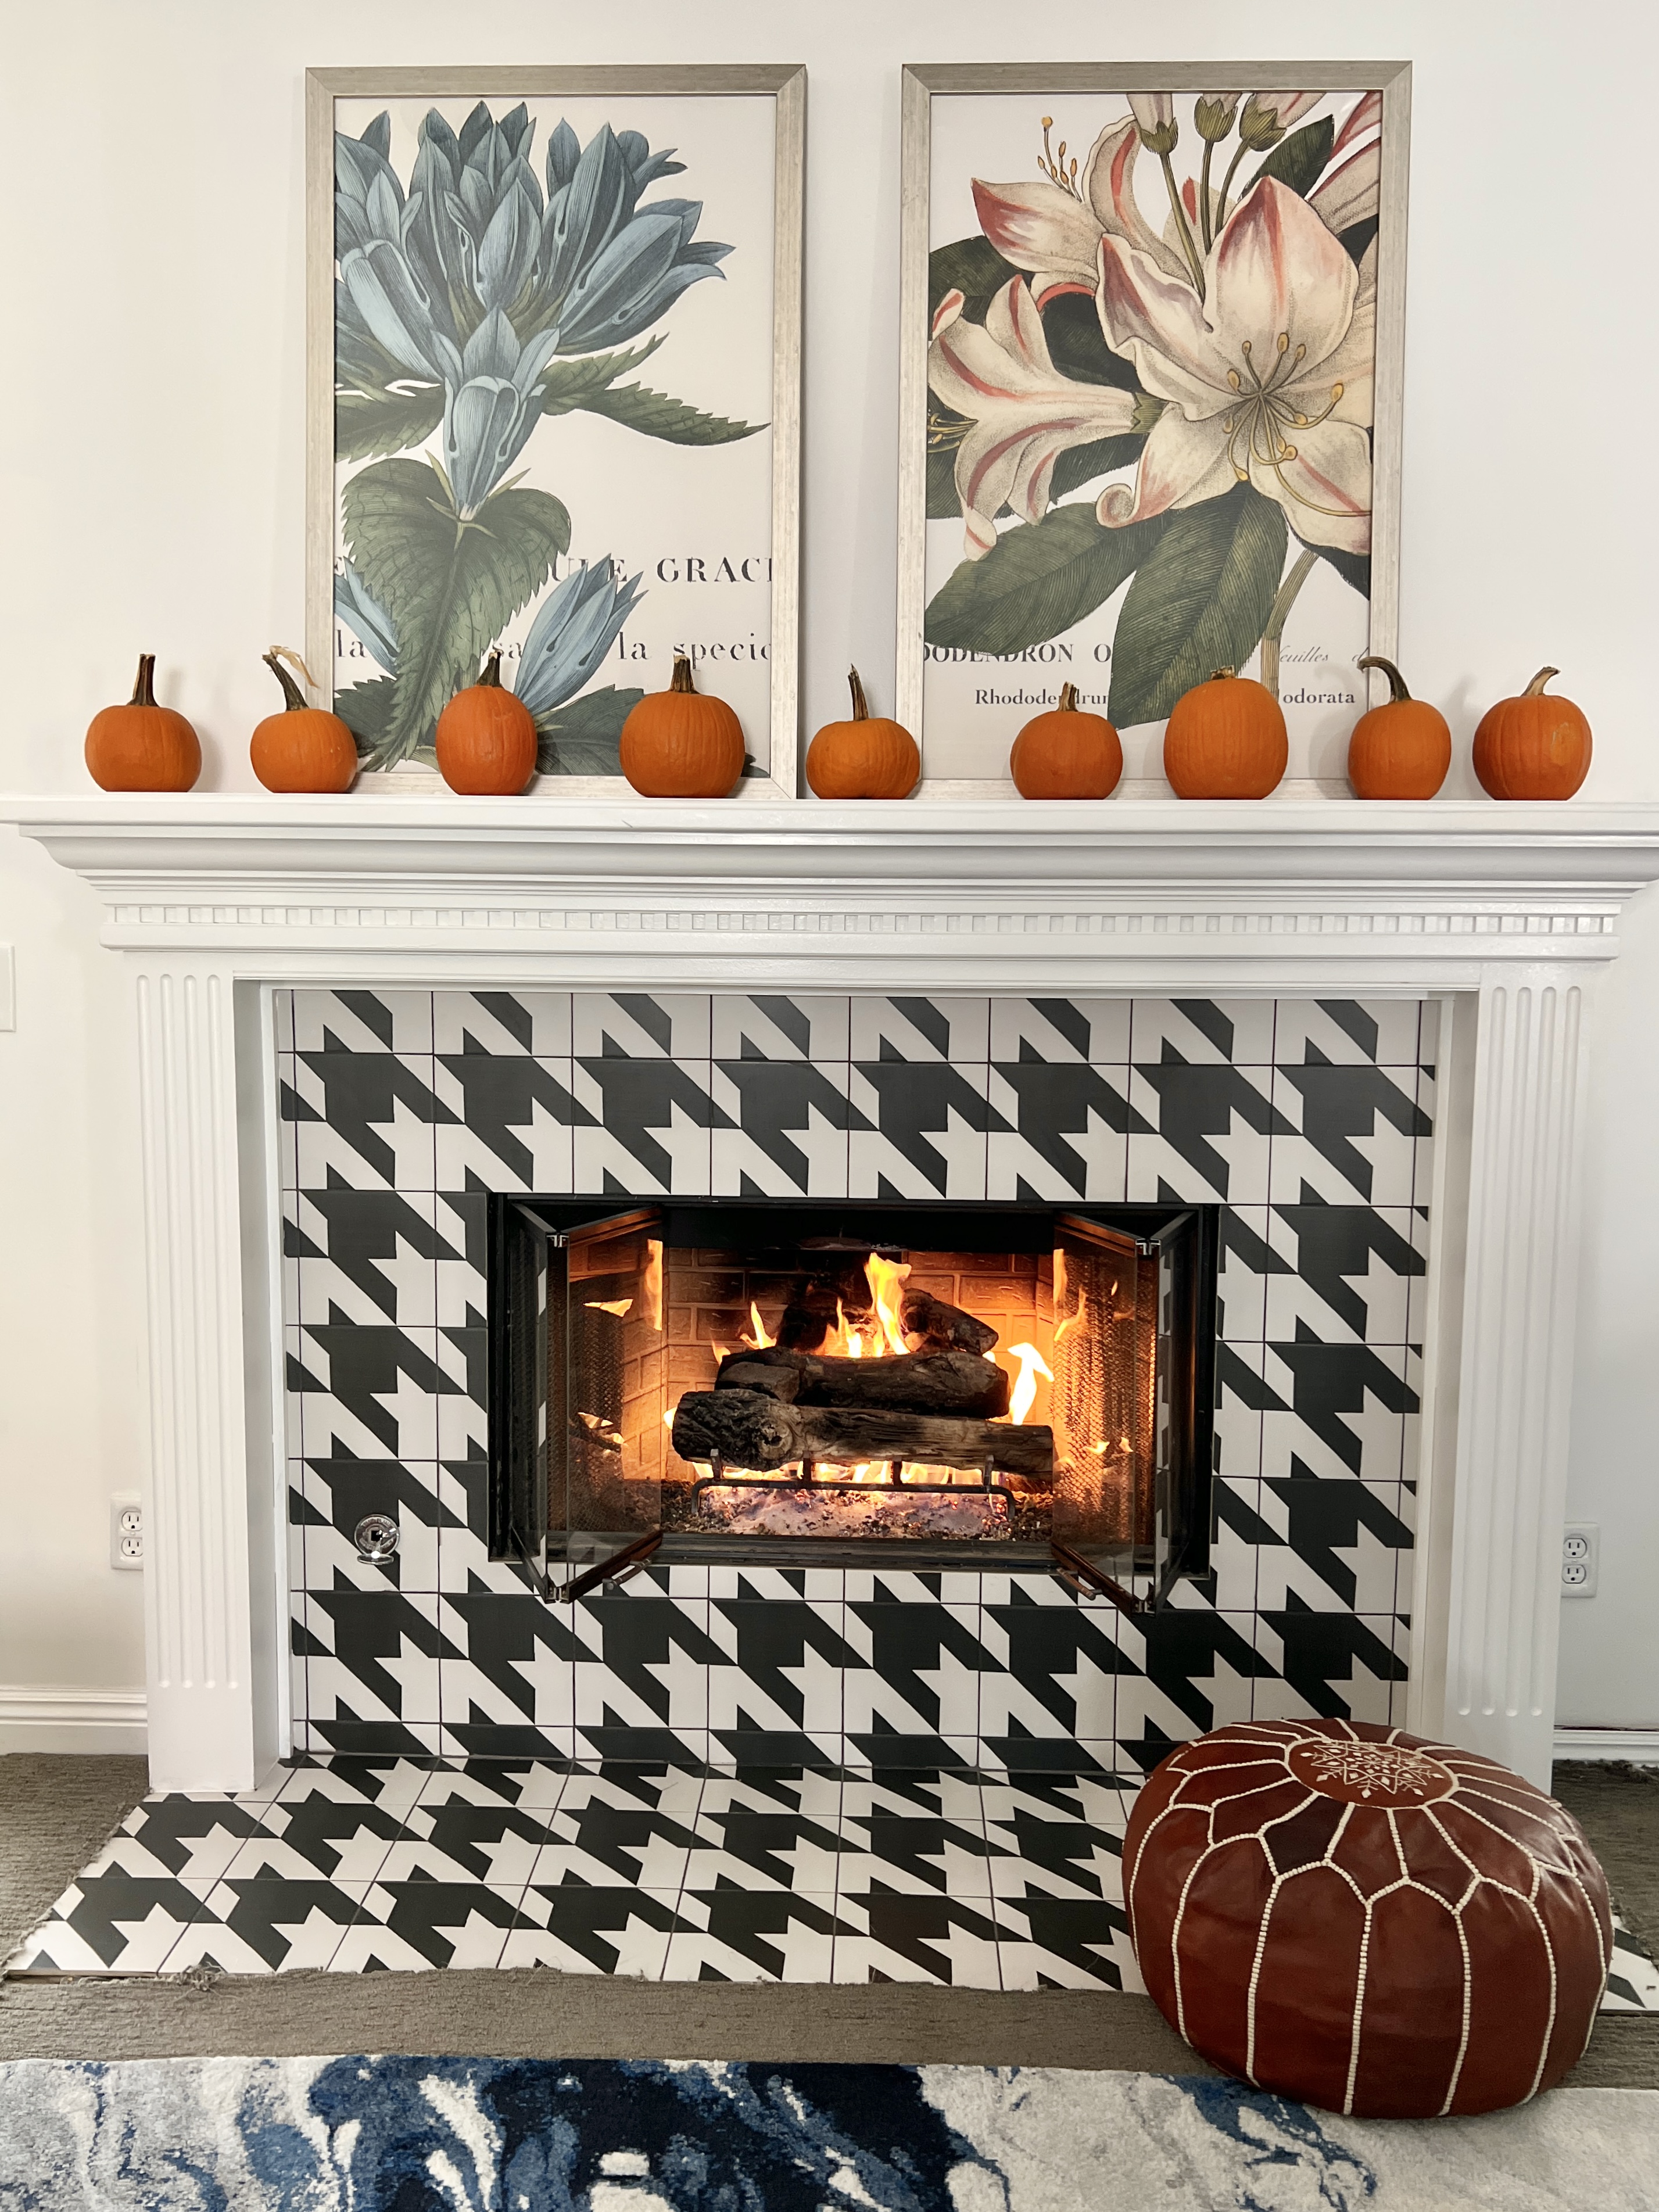 A fireplace with pumpkins lined up on the mantel.